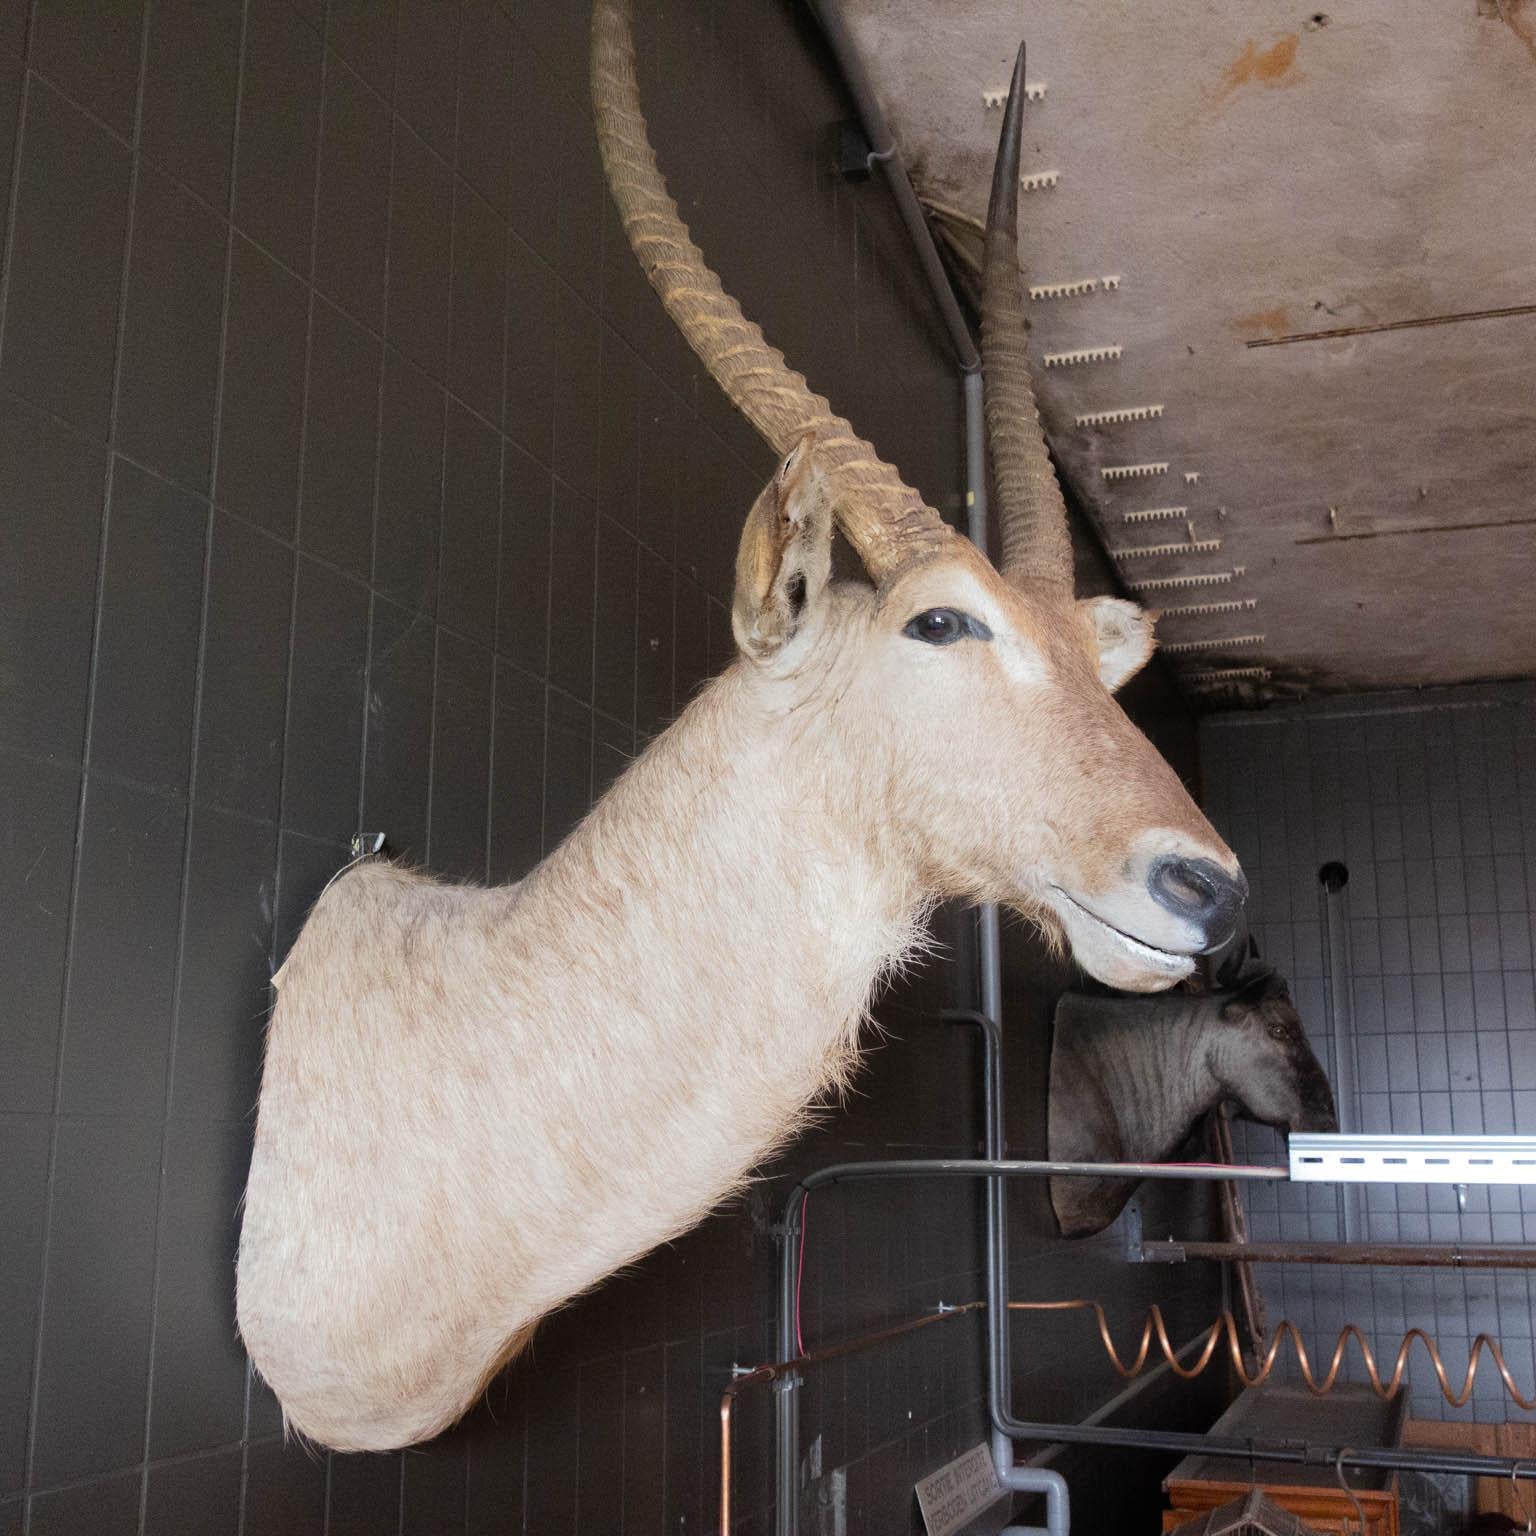 The Kobus Ellipsiprymnus or waterbuck is a species of Antelope that lives south of the Sahara in the wetlands of Africa. This bust is from a male waterbuck, this can be seen from the big horns. The animal is skillfully set up and is in great